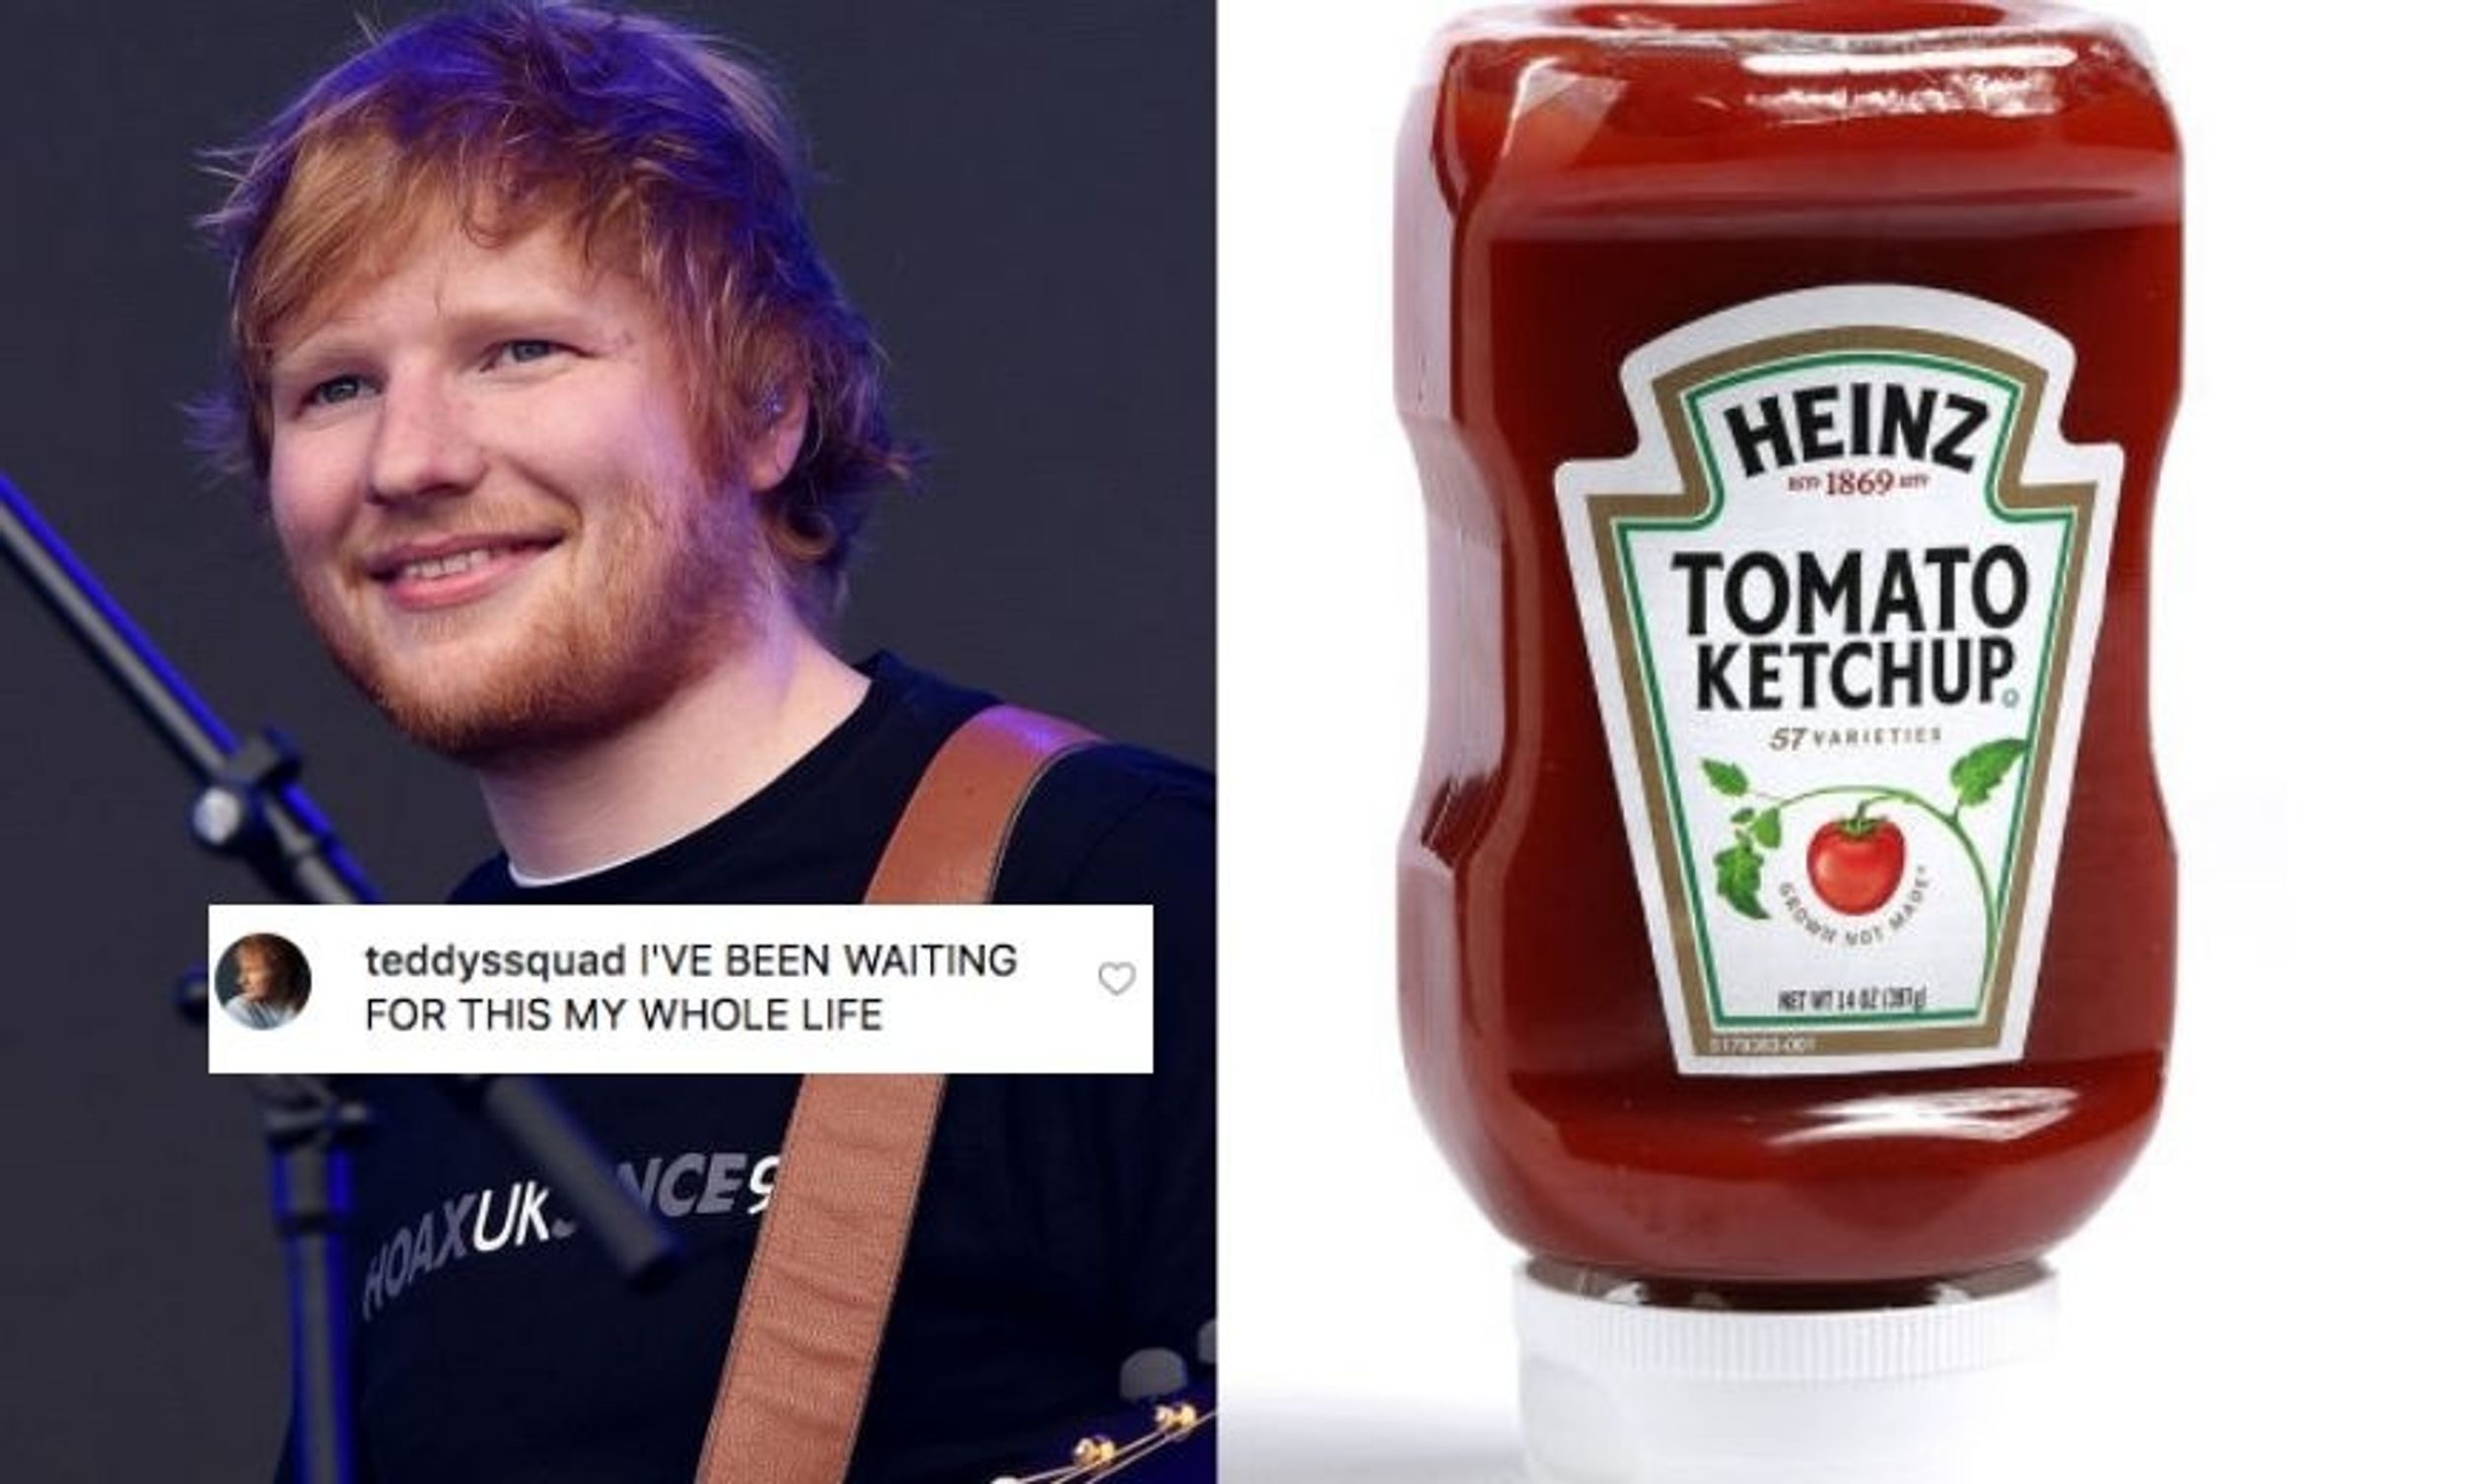 Heinz releases special Ed Sheeran-themed bottles of tomato ketchup